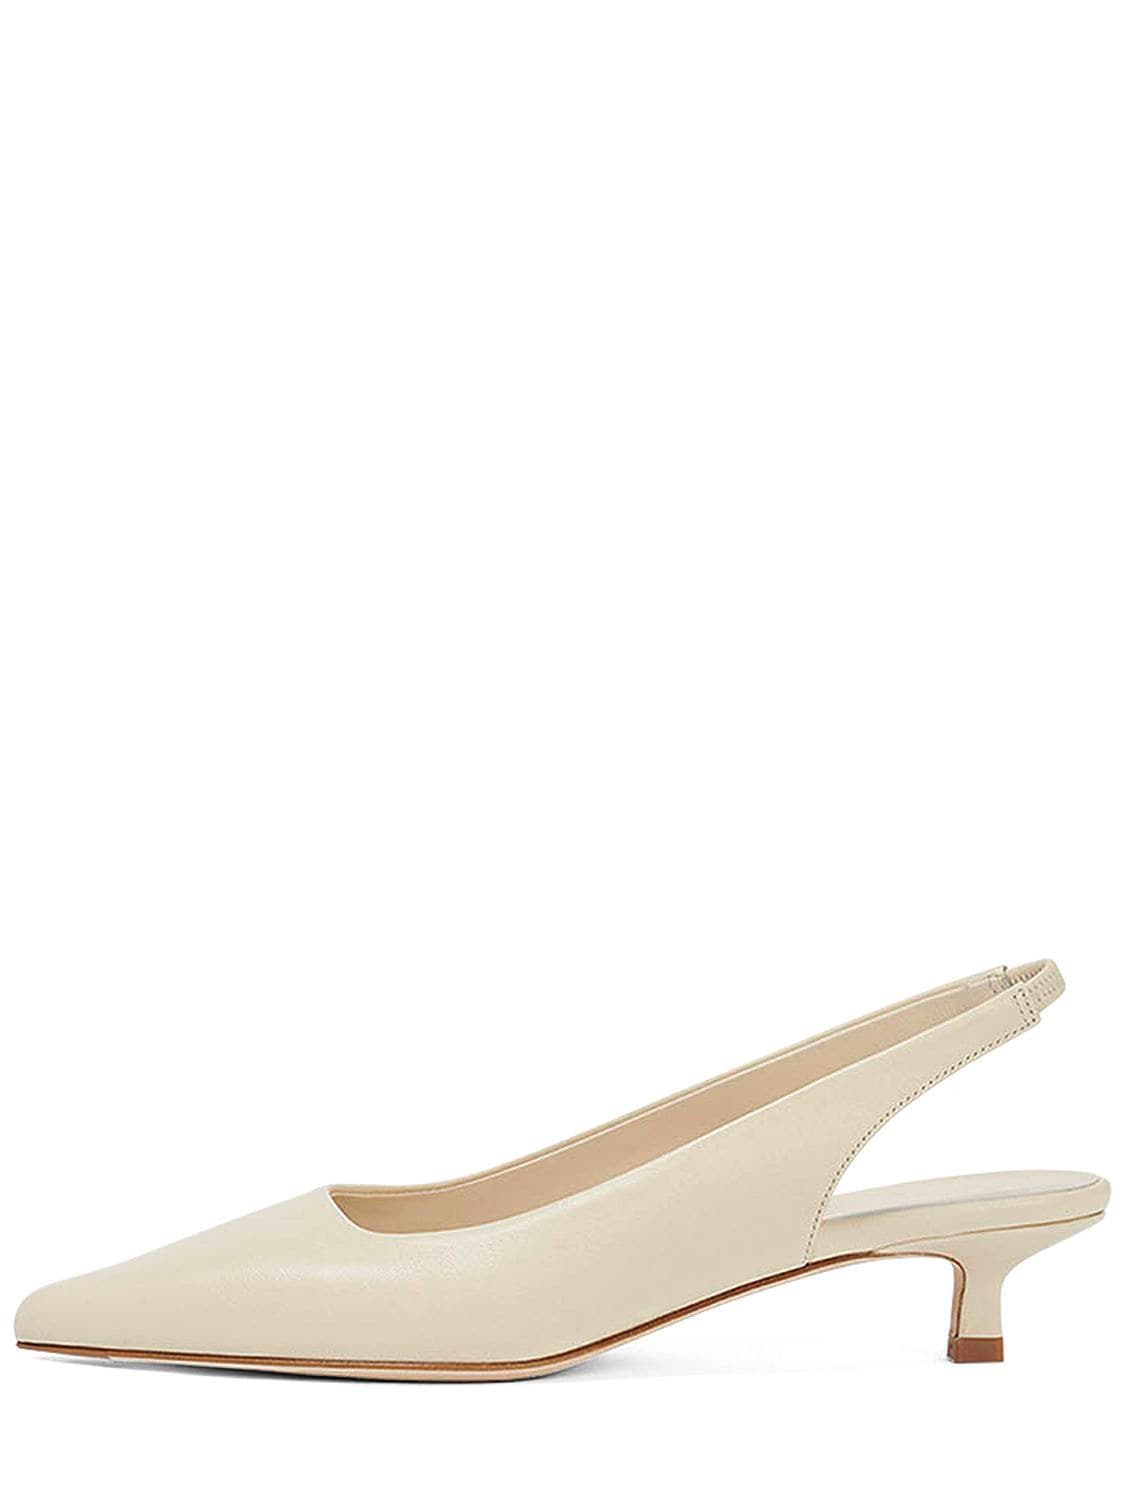 Aeyde 35mm Valerie Leather Slingbacks In Creamy